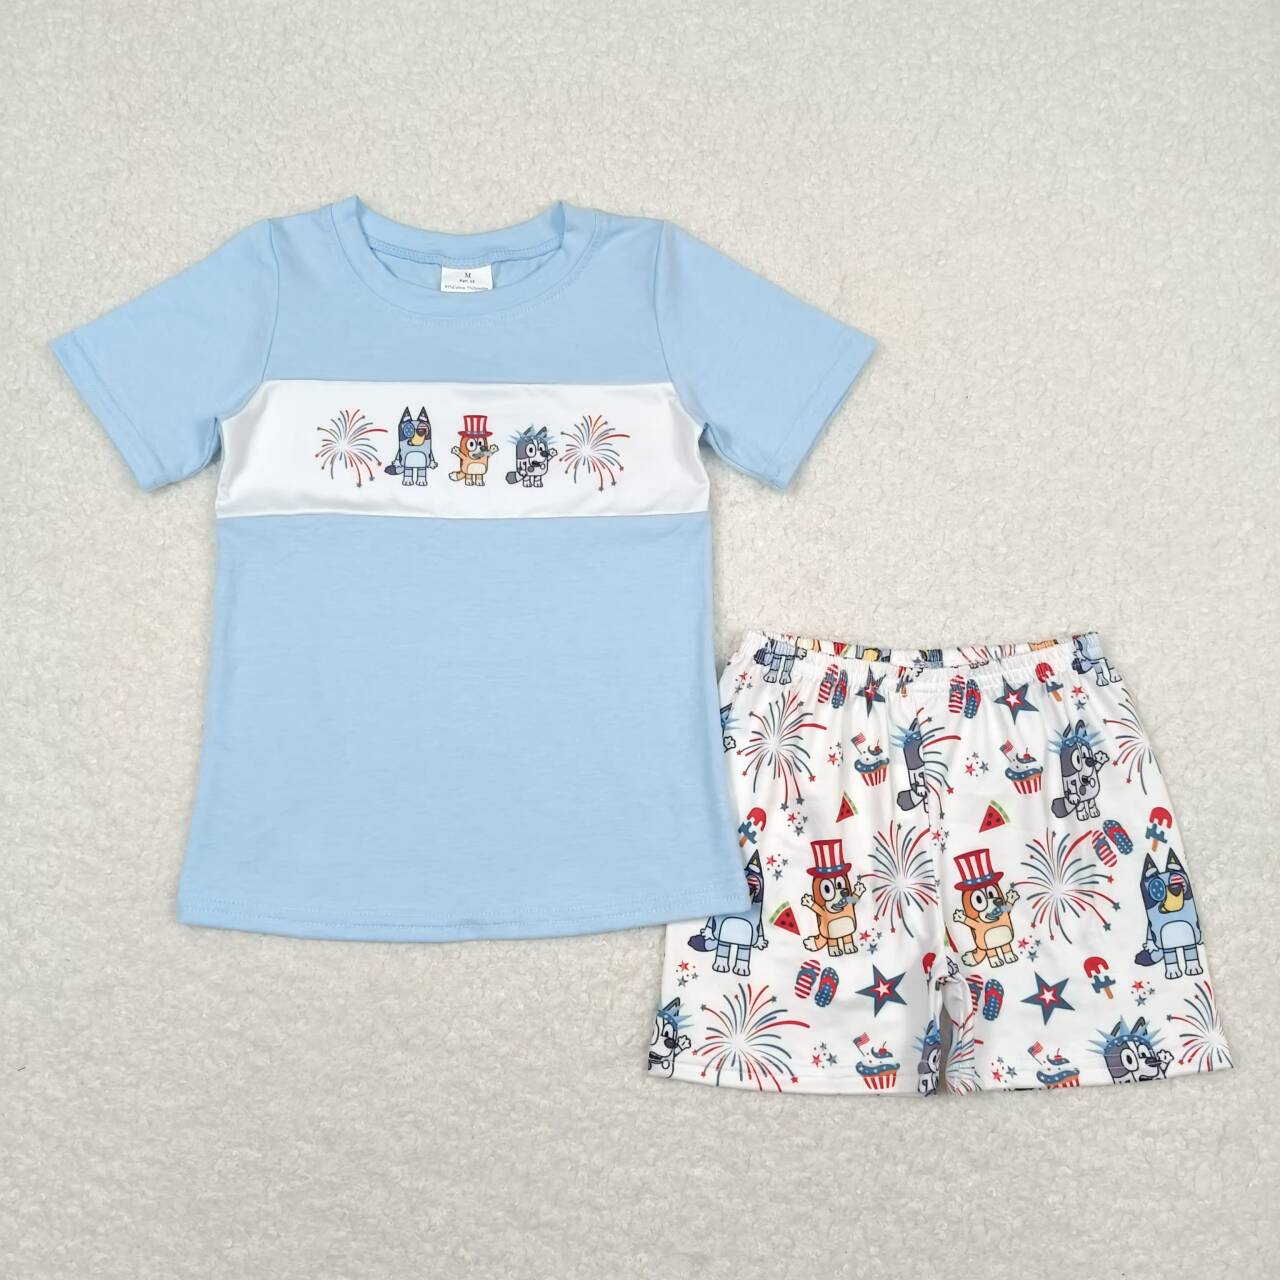 4th of july boy shorts set kidsd patriotic outfit